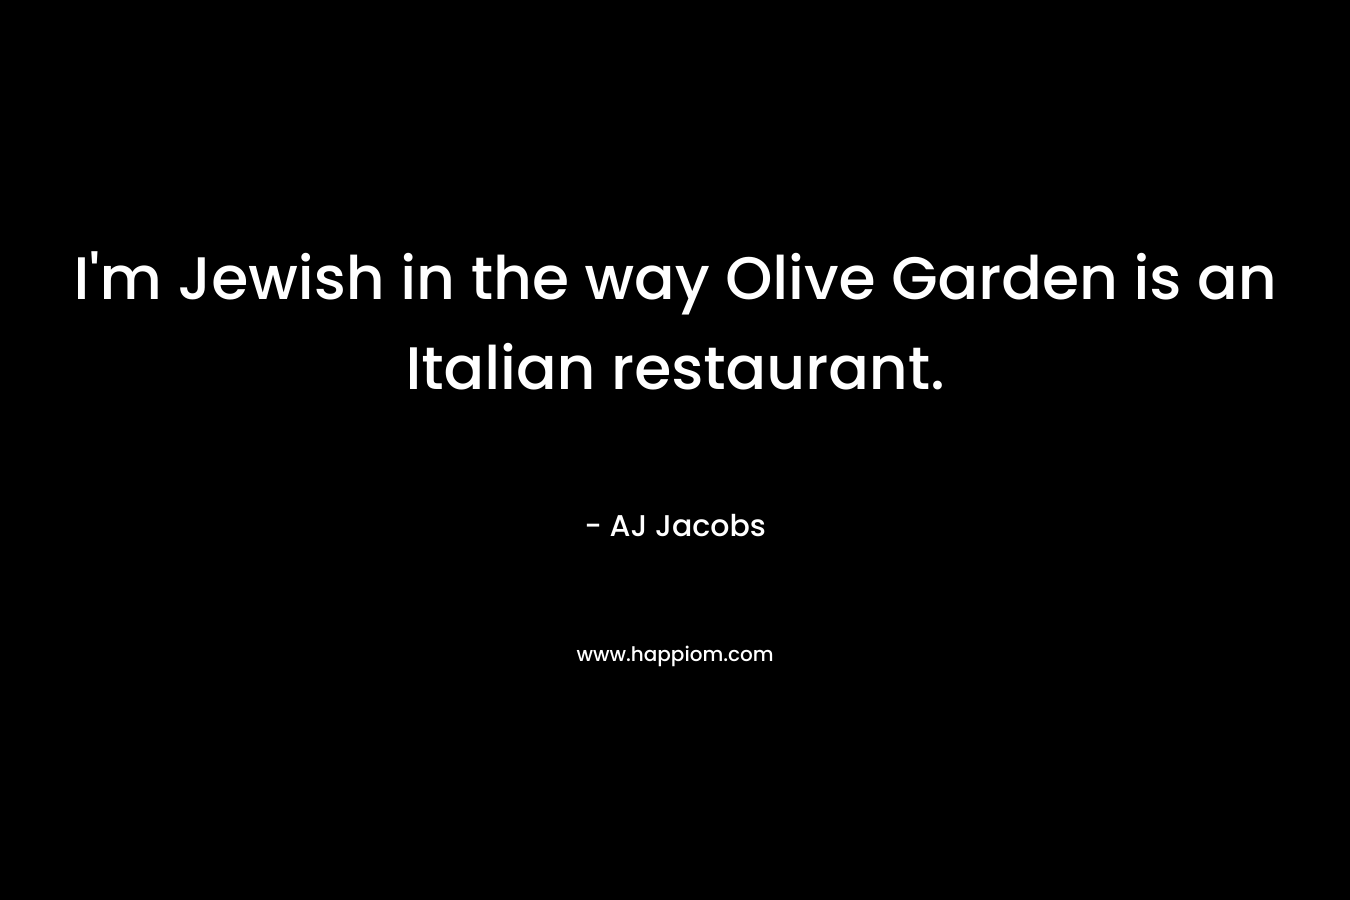 I’m Jewish in the way Olive Garden is an Italian restaurant. – AJ Jacobs